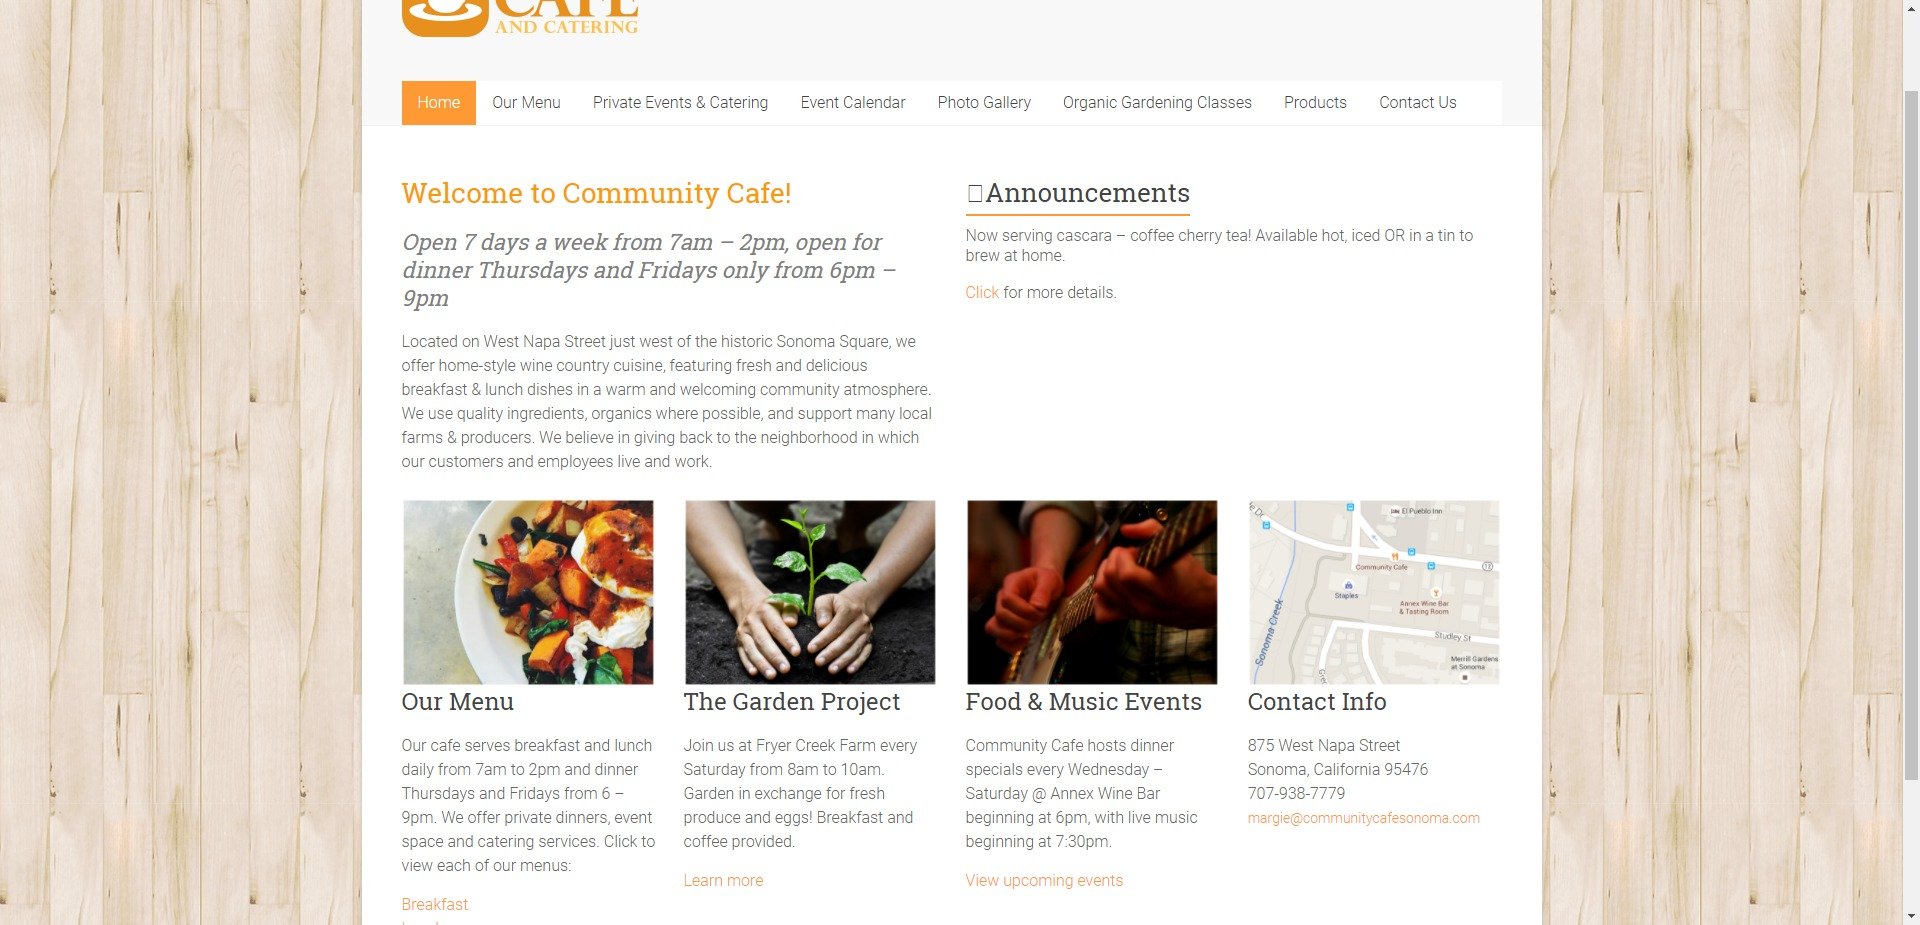 Community Cafe & Catering